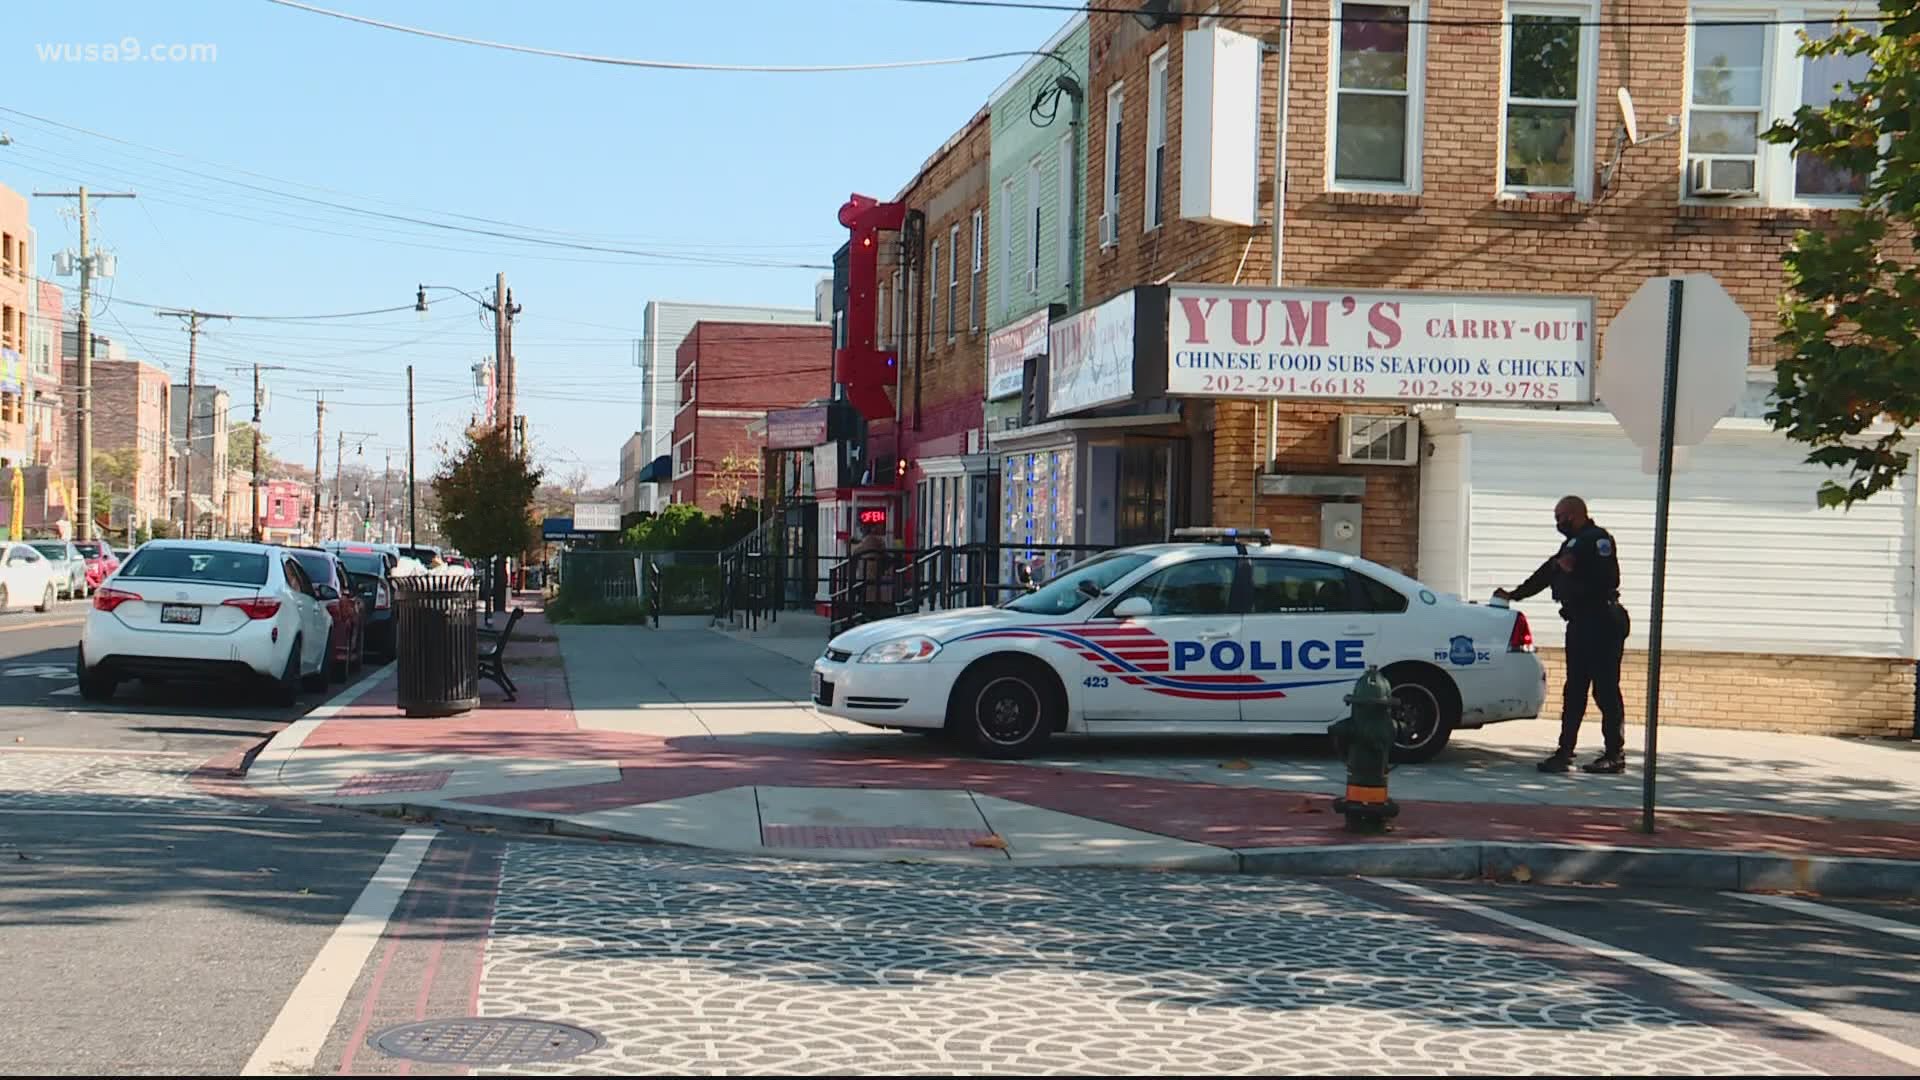 WUSA9 spoke with residents in DC that are concerned about the increase in shooting that the District has seen in 2020.